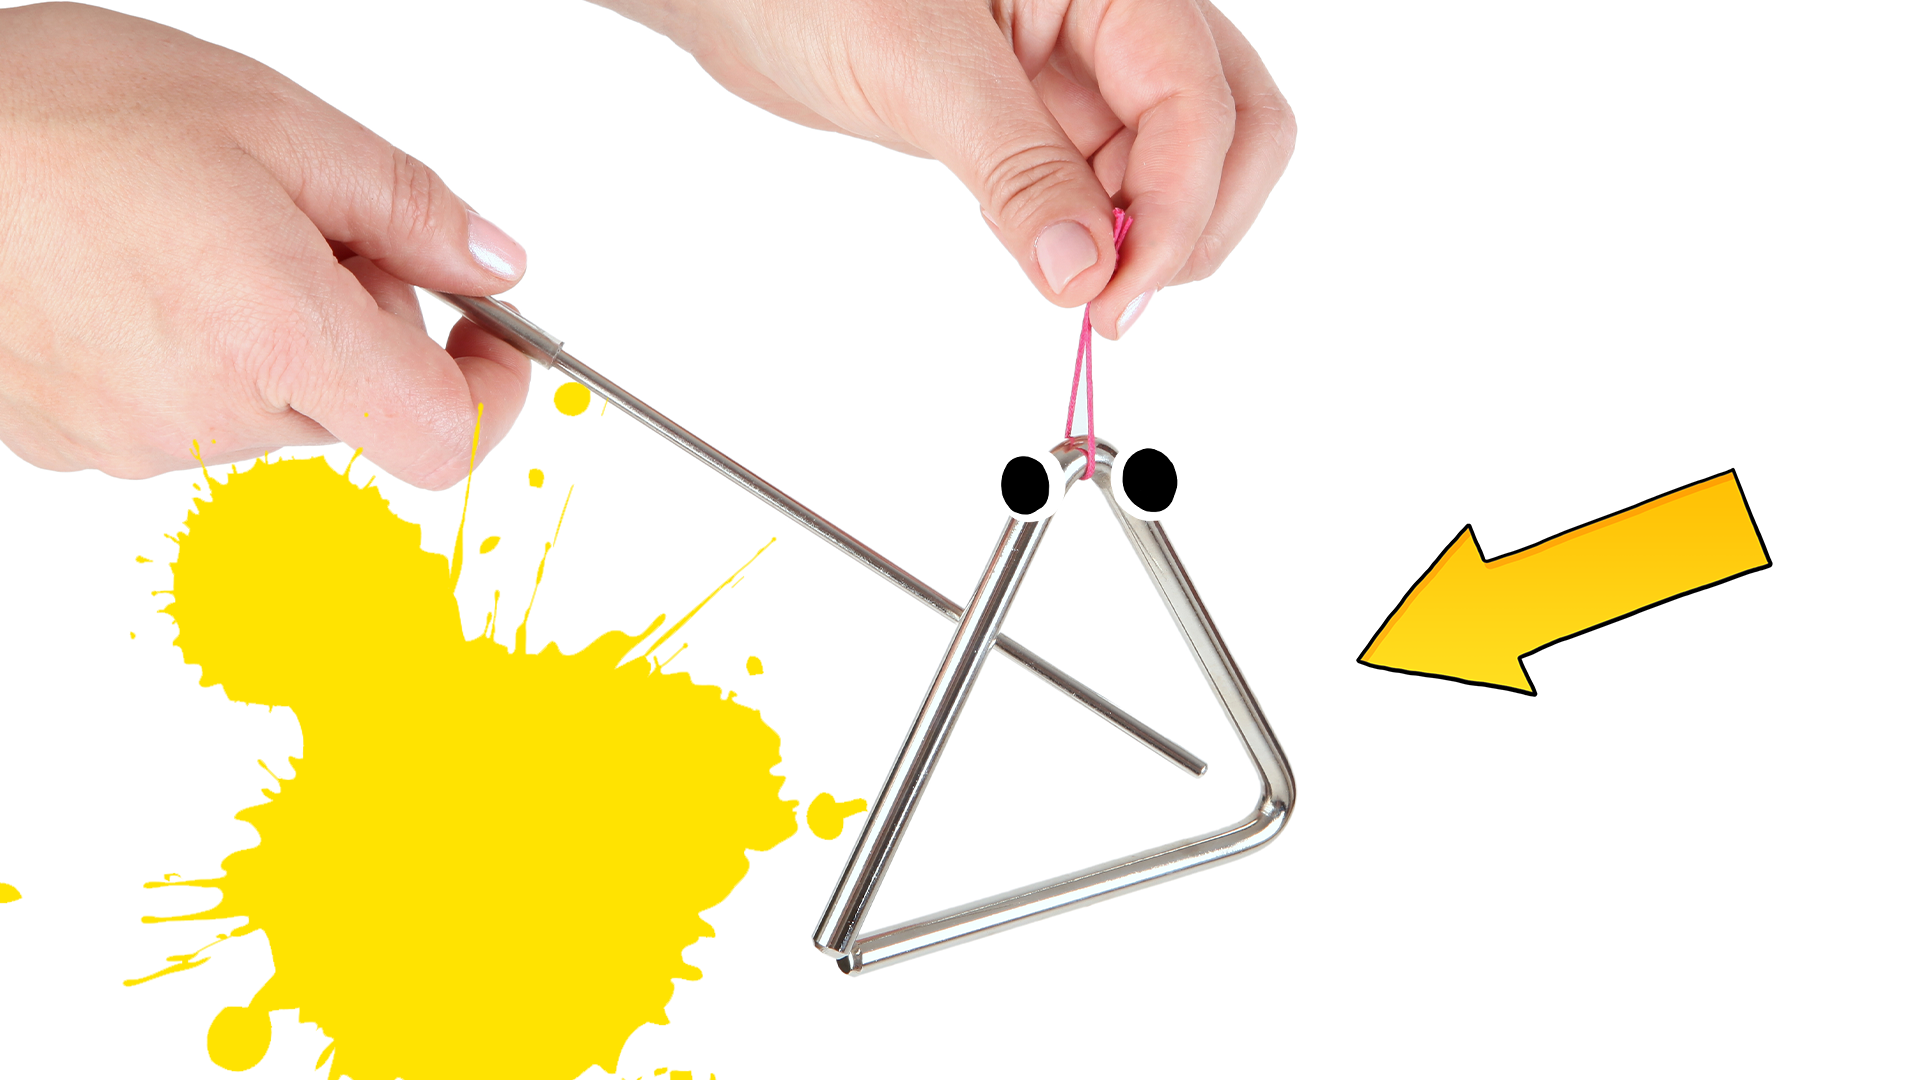 Hand playing triangle with eyes on white background with yellow splat and arrow